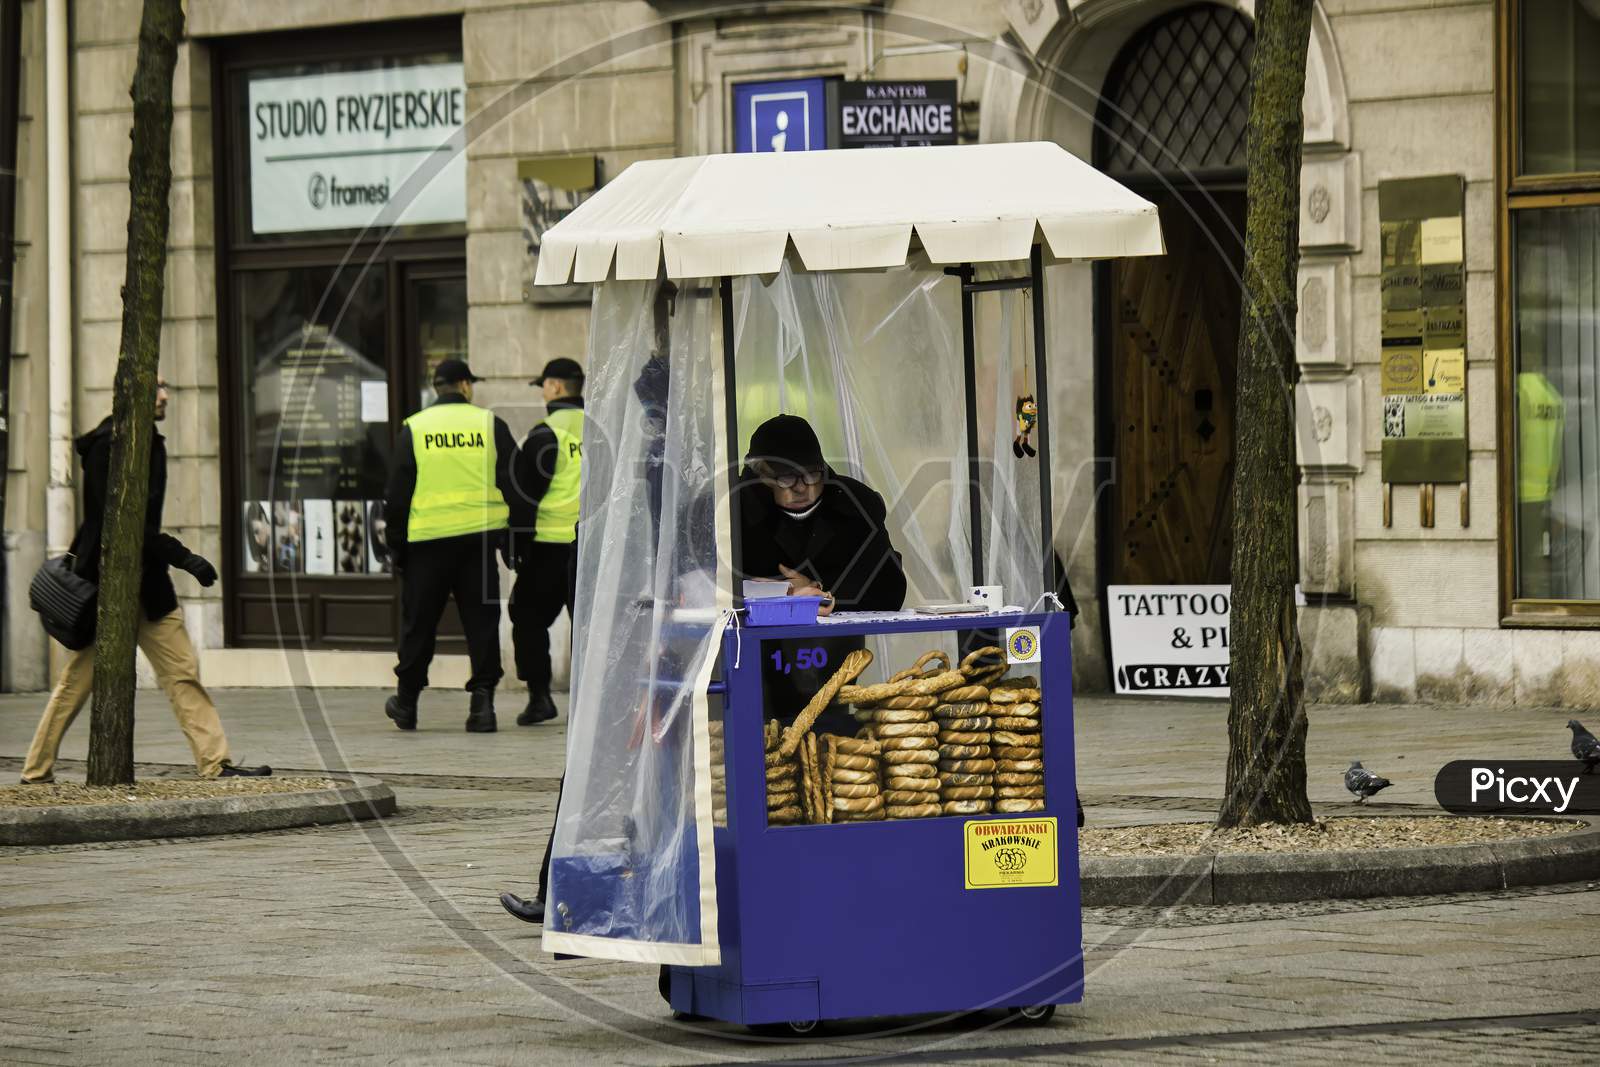 Krakow, Poland - December 16, 2014: A Bread Seller Man Waiting For Customers In His Outlet On A Street